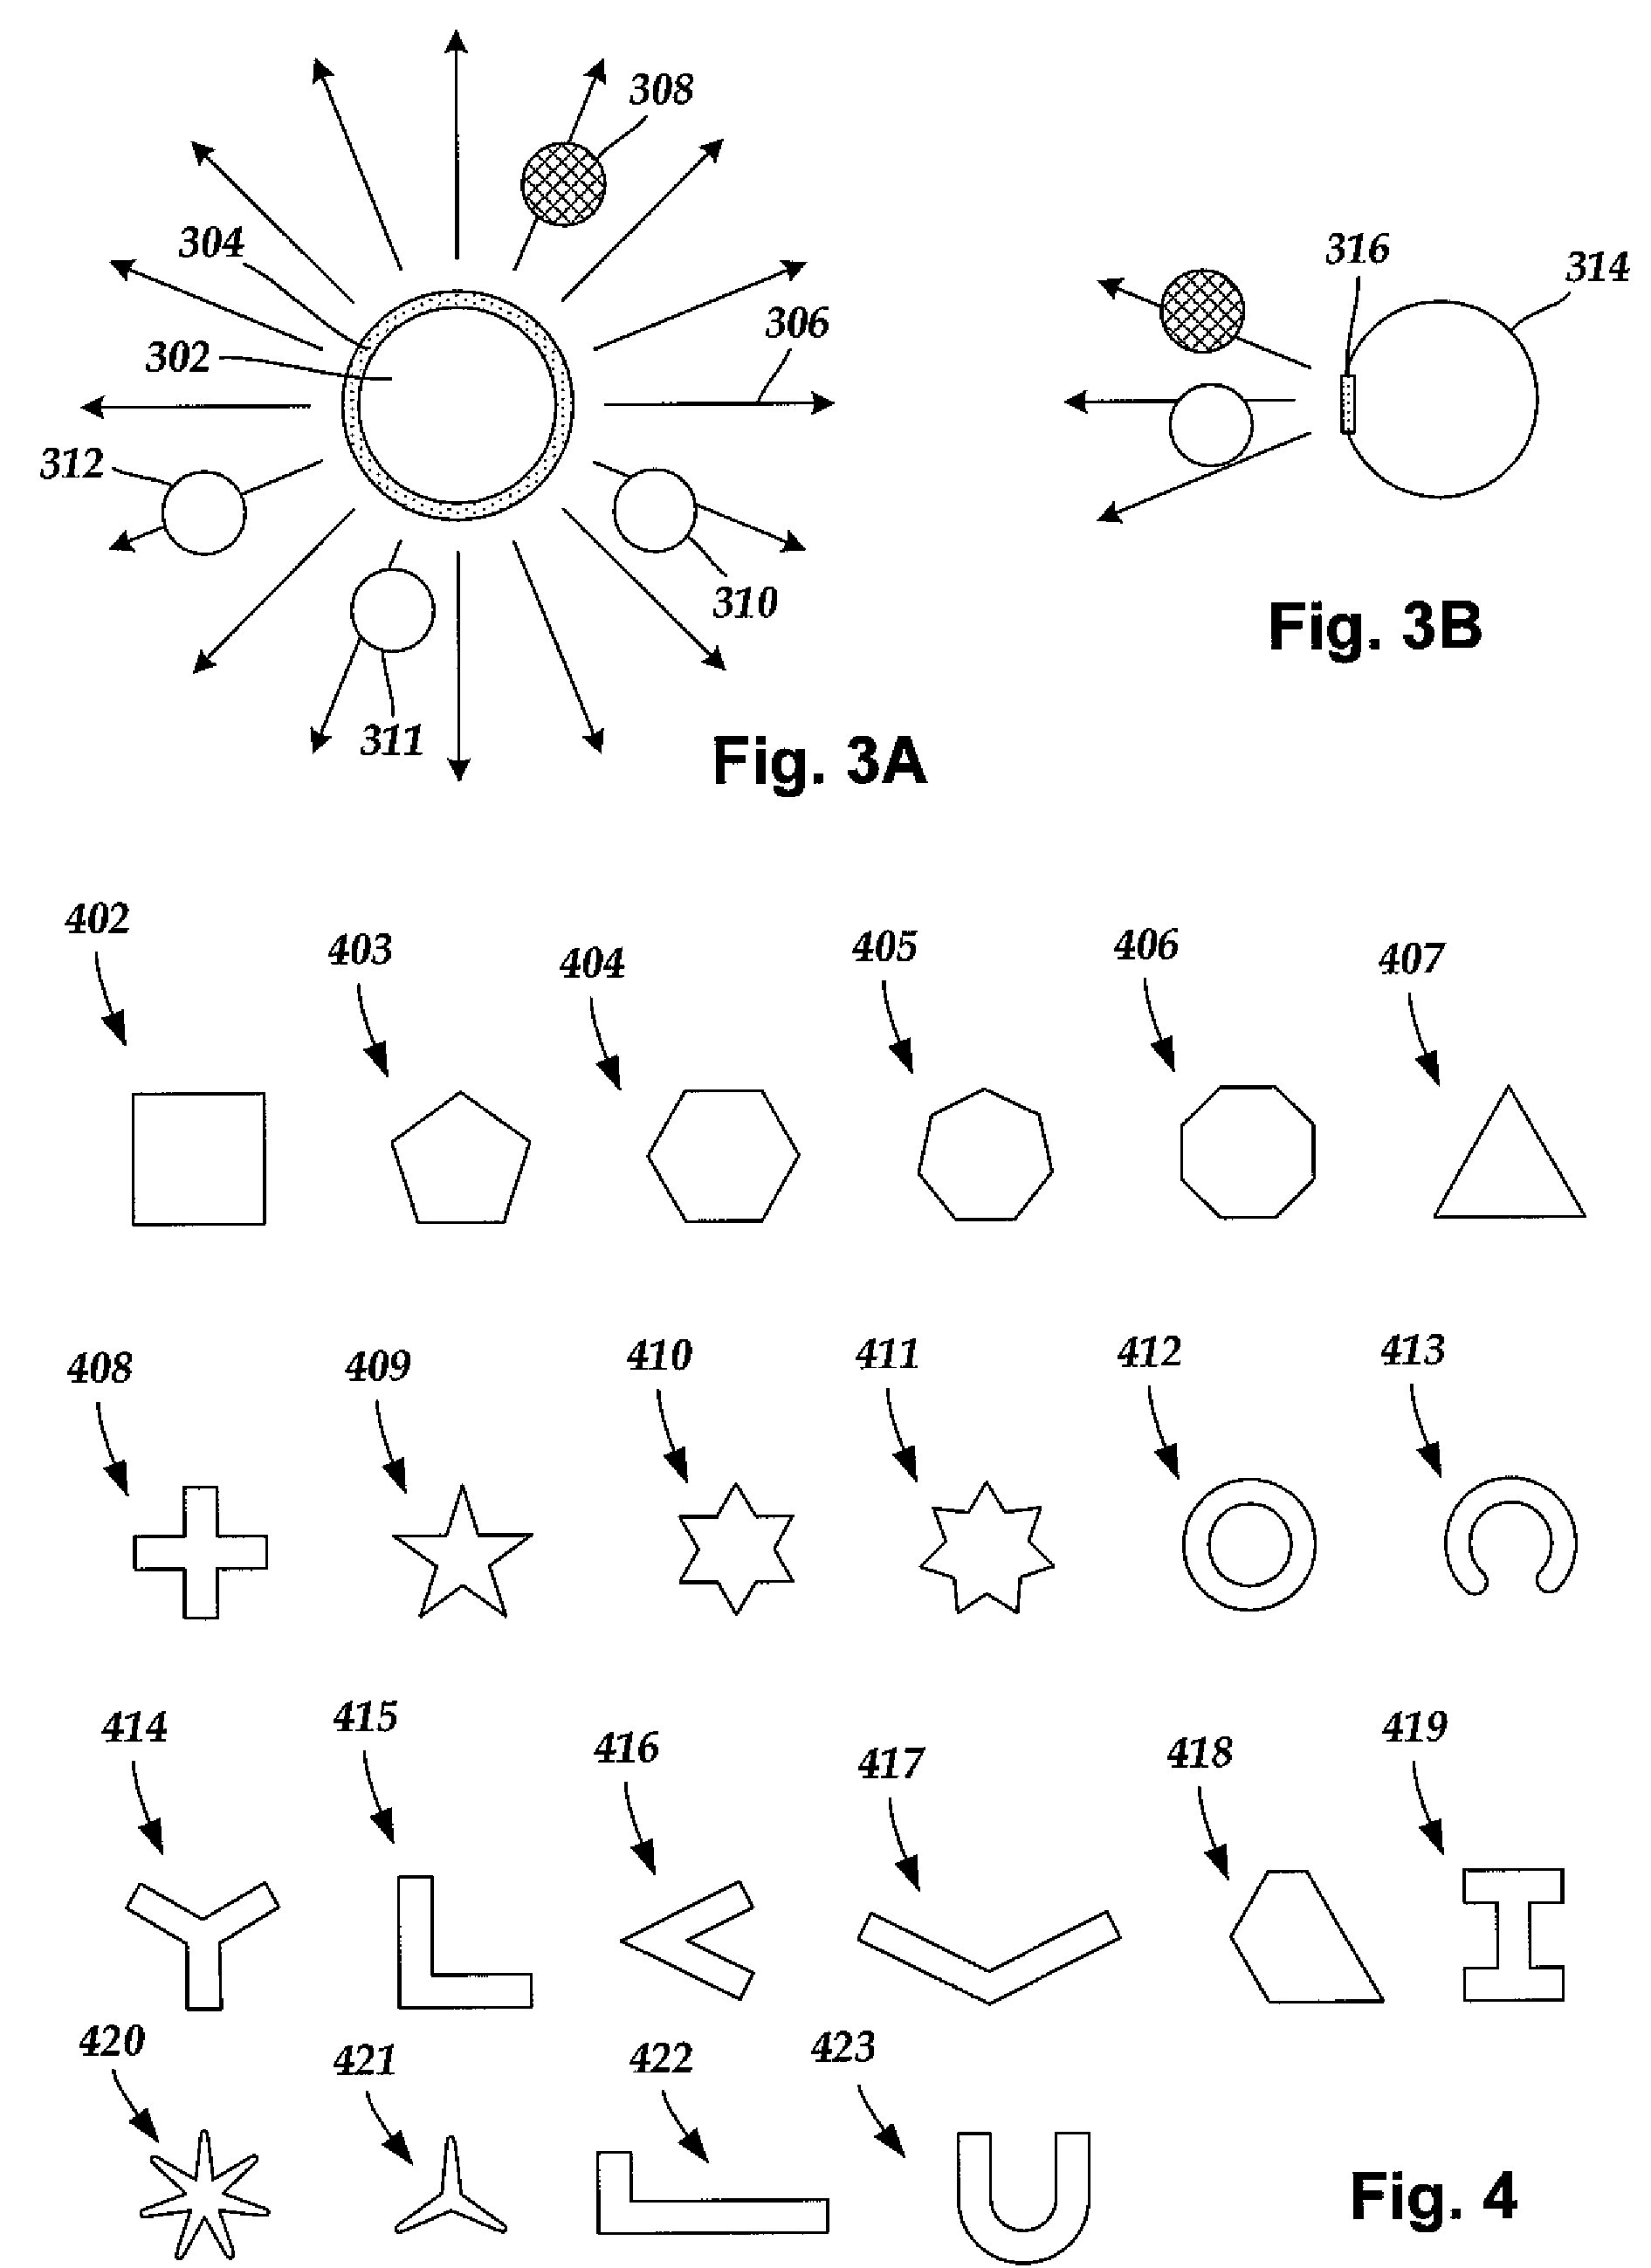 Leads with non-circular-shaped distal ends for brain stimulation systems and methods of making and using